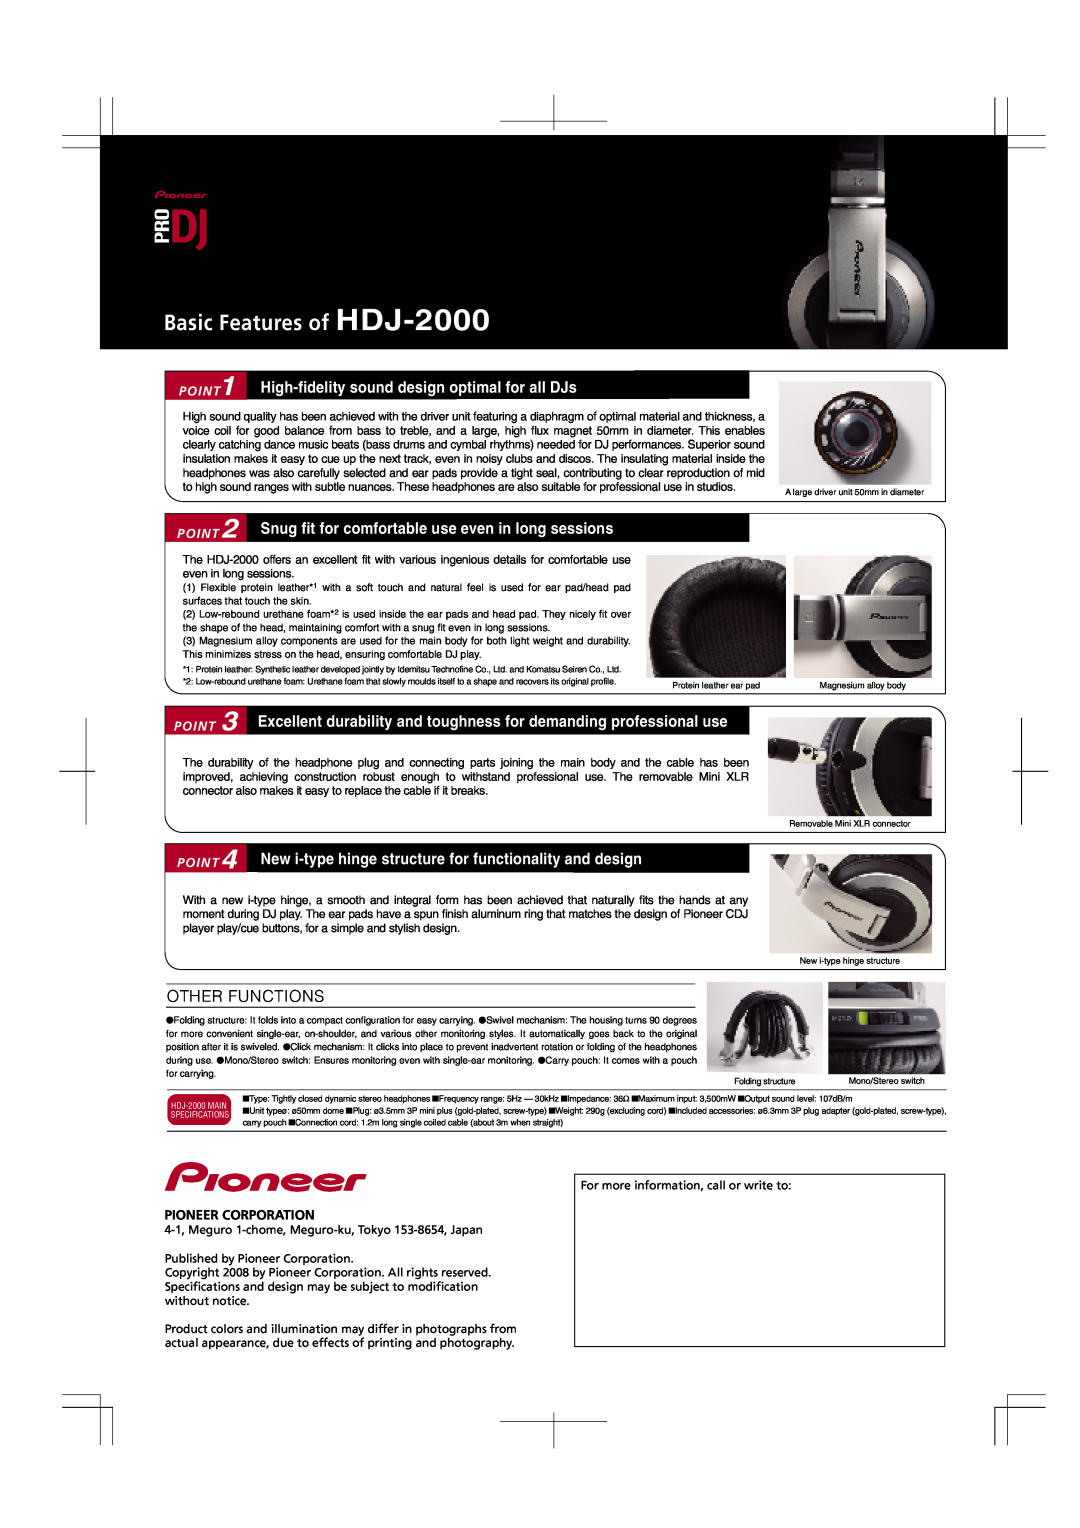 Pioneer manual Basic Features of HDJ-2000, High-fidelitysound design optimal for all DJs, Other Functions, POINT1, Point 